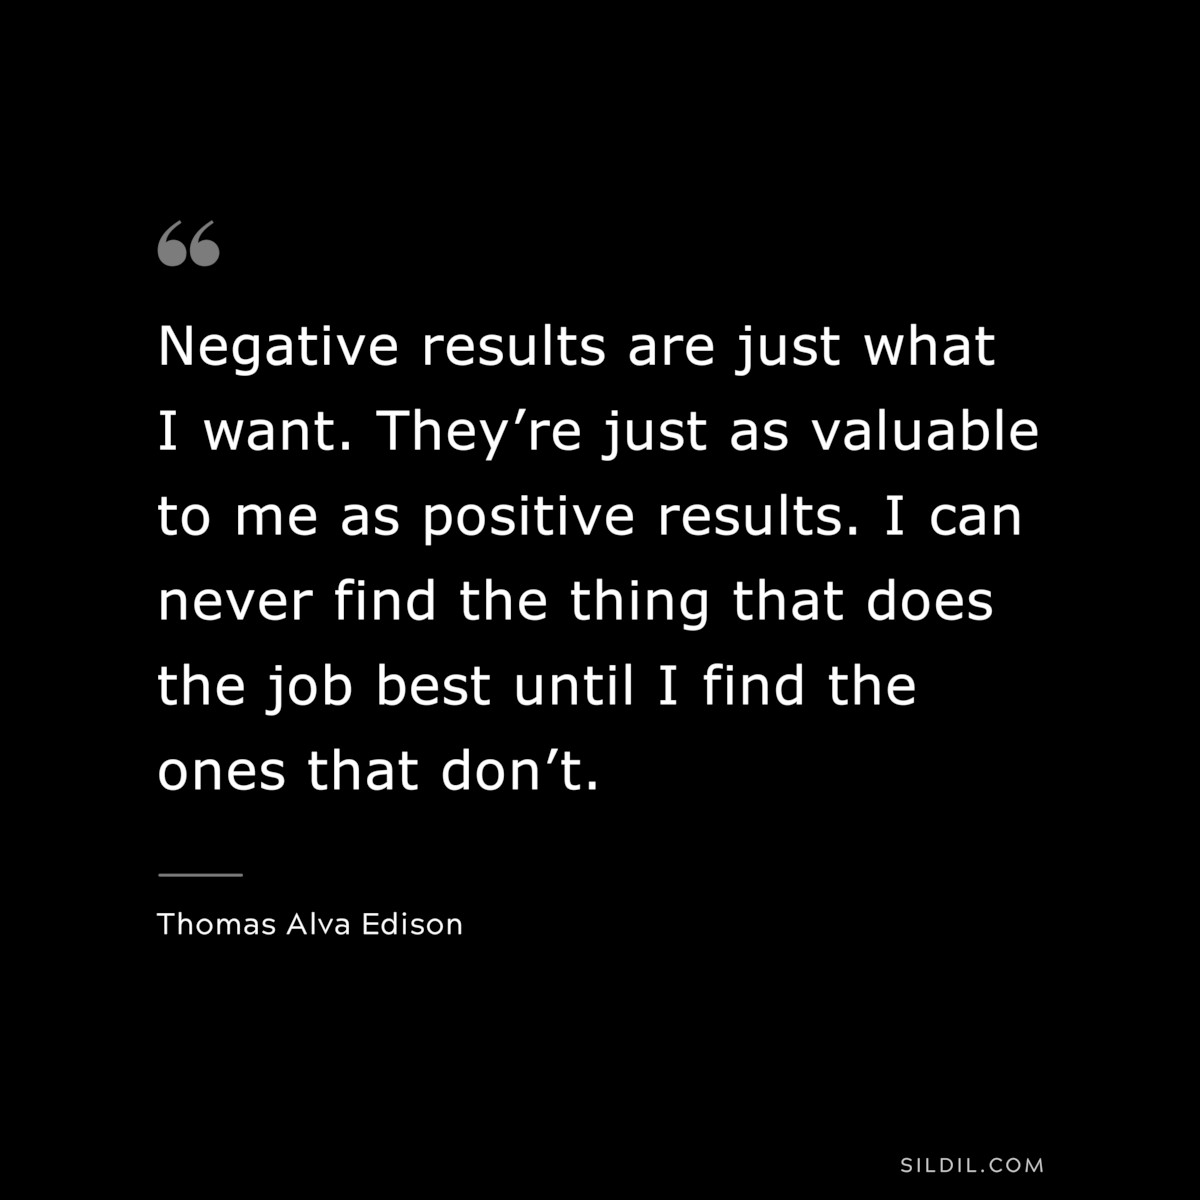 Negative results are just what I want. They’re just as valuable to me as positive results. I can never find the thing that does the job best until I find the ones that don’t. ― Thomas Alva Edison